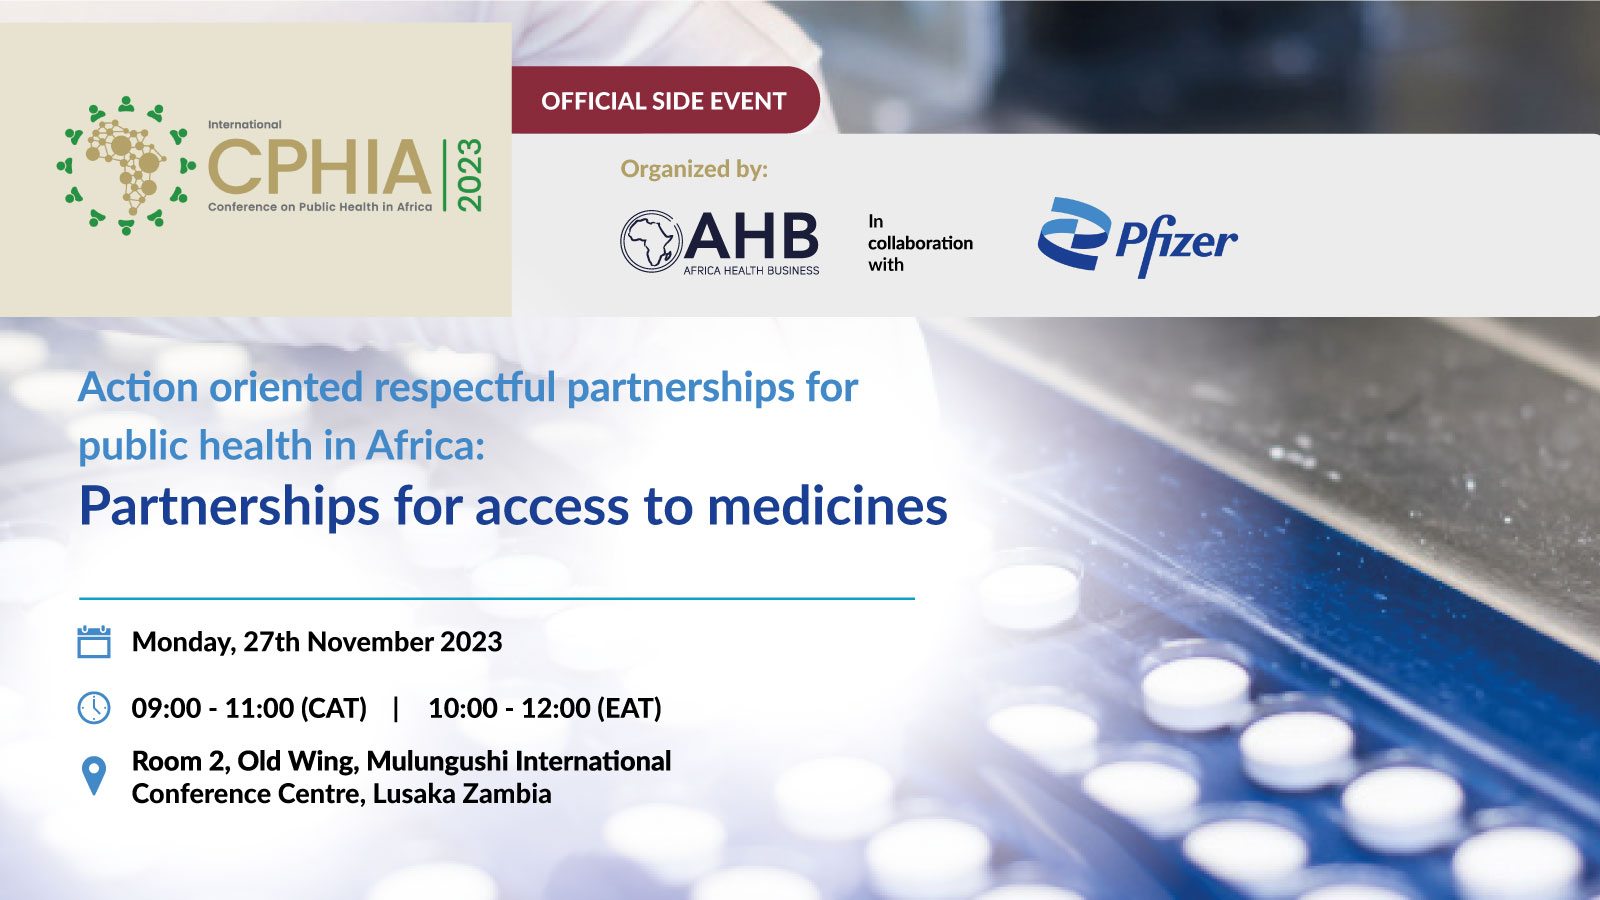 Action oriented respectful partnerships for public health in Africa: Partnerships for access to medicines